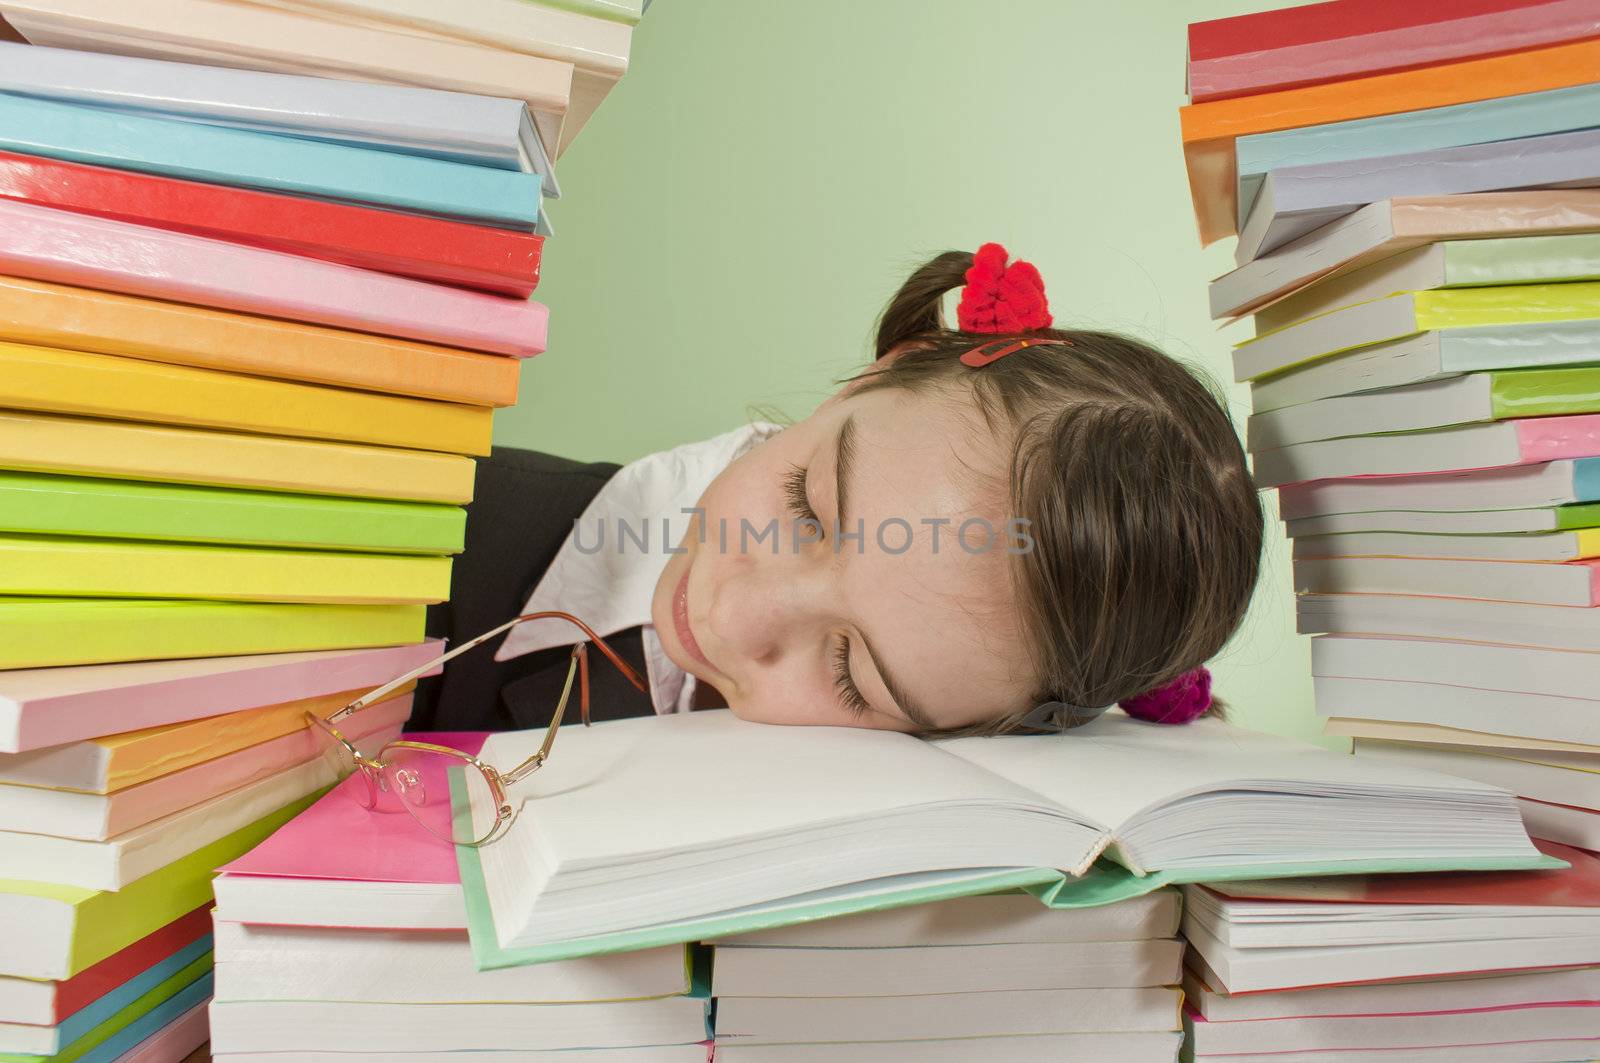 Teen girl sleeping on the stack of books by AndreyKr